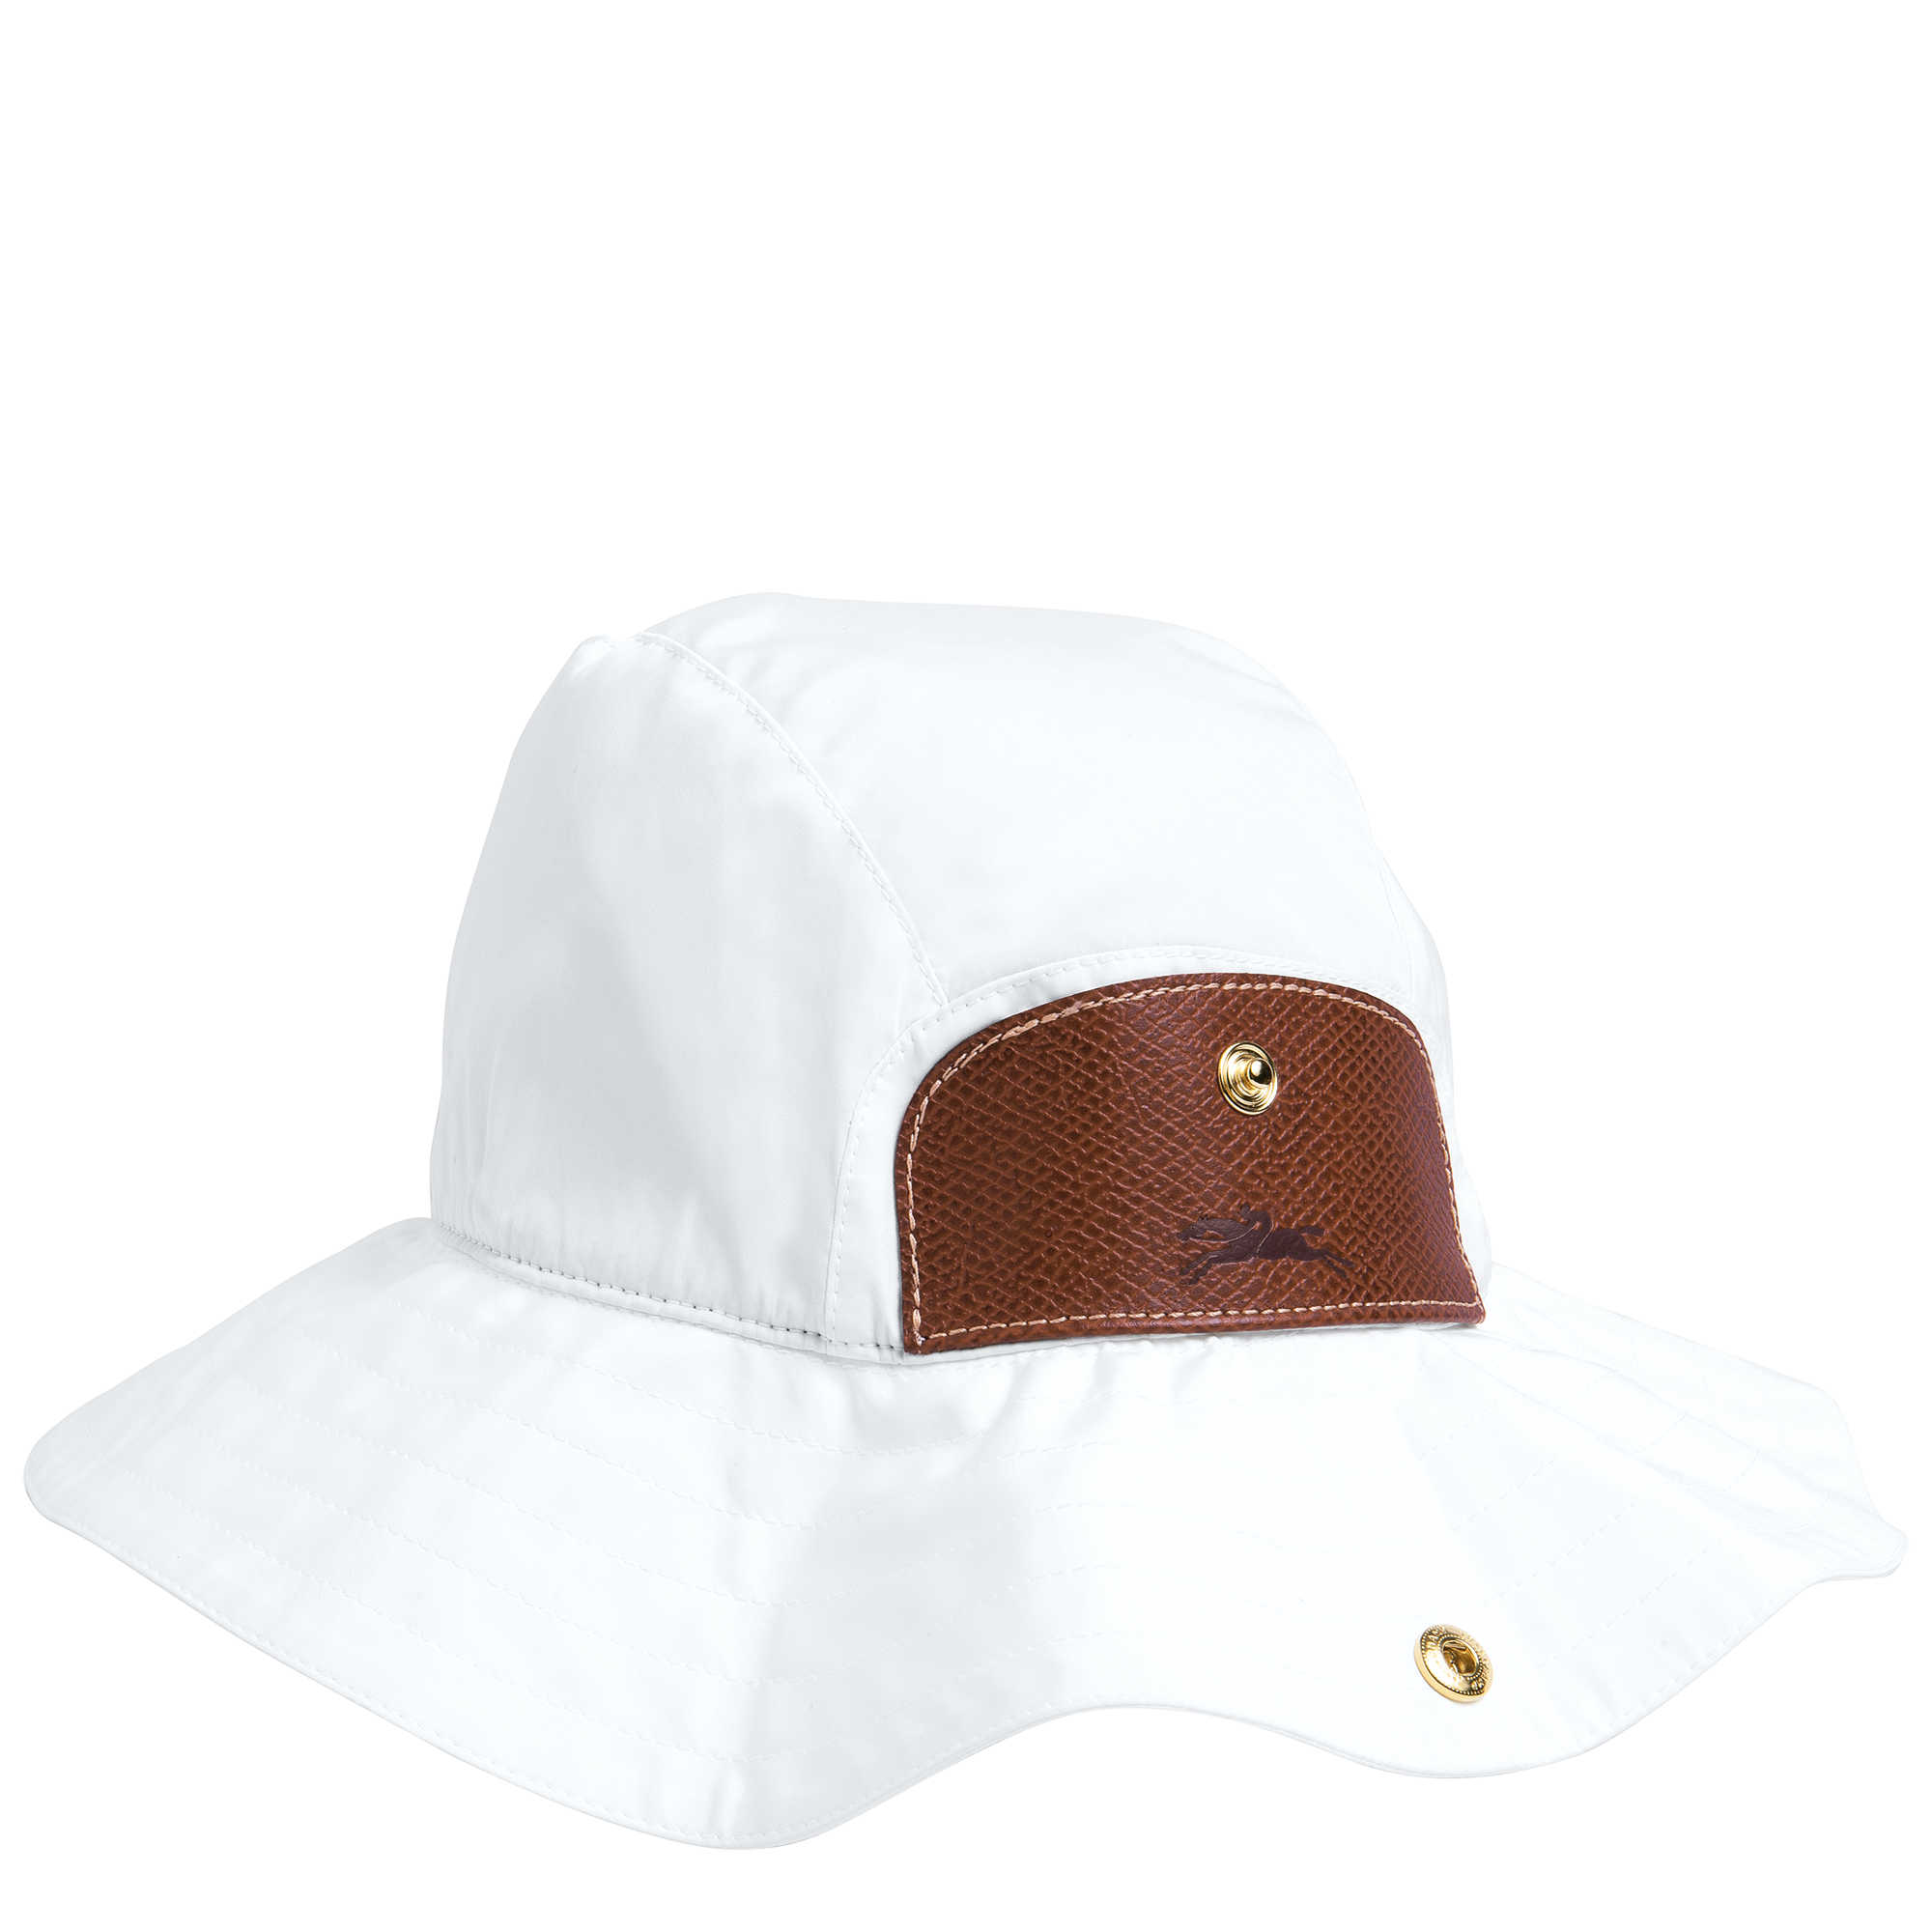 Longchamp X D_heygere white hat Php 18,000.png